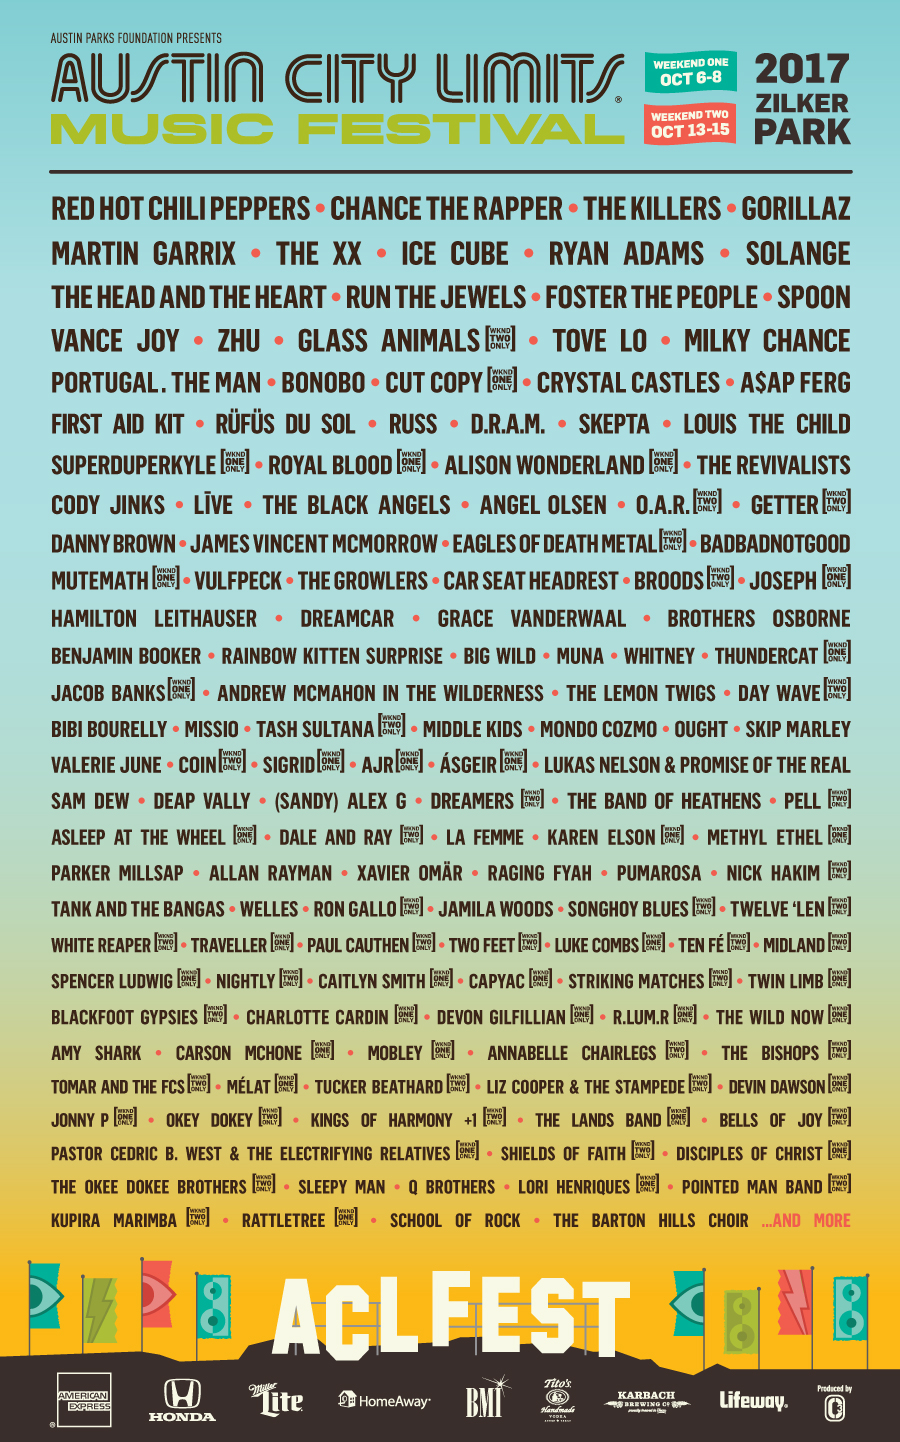 Austin City Limits 2017: Jay Z, Gorillaz, Chance the Rapper, the Killers, Red Hot Chili Peppers, Ryan Adams & More [UPDATE]